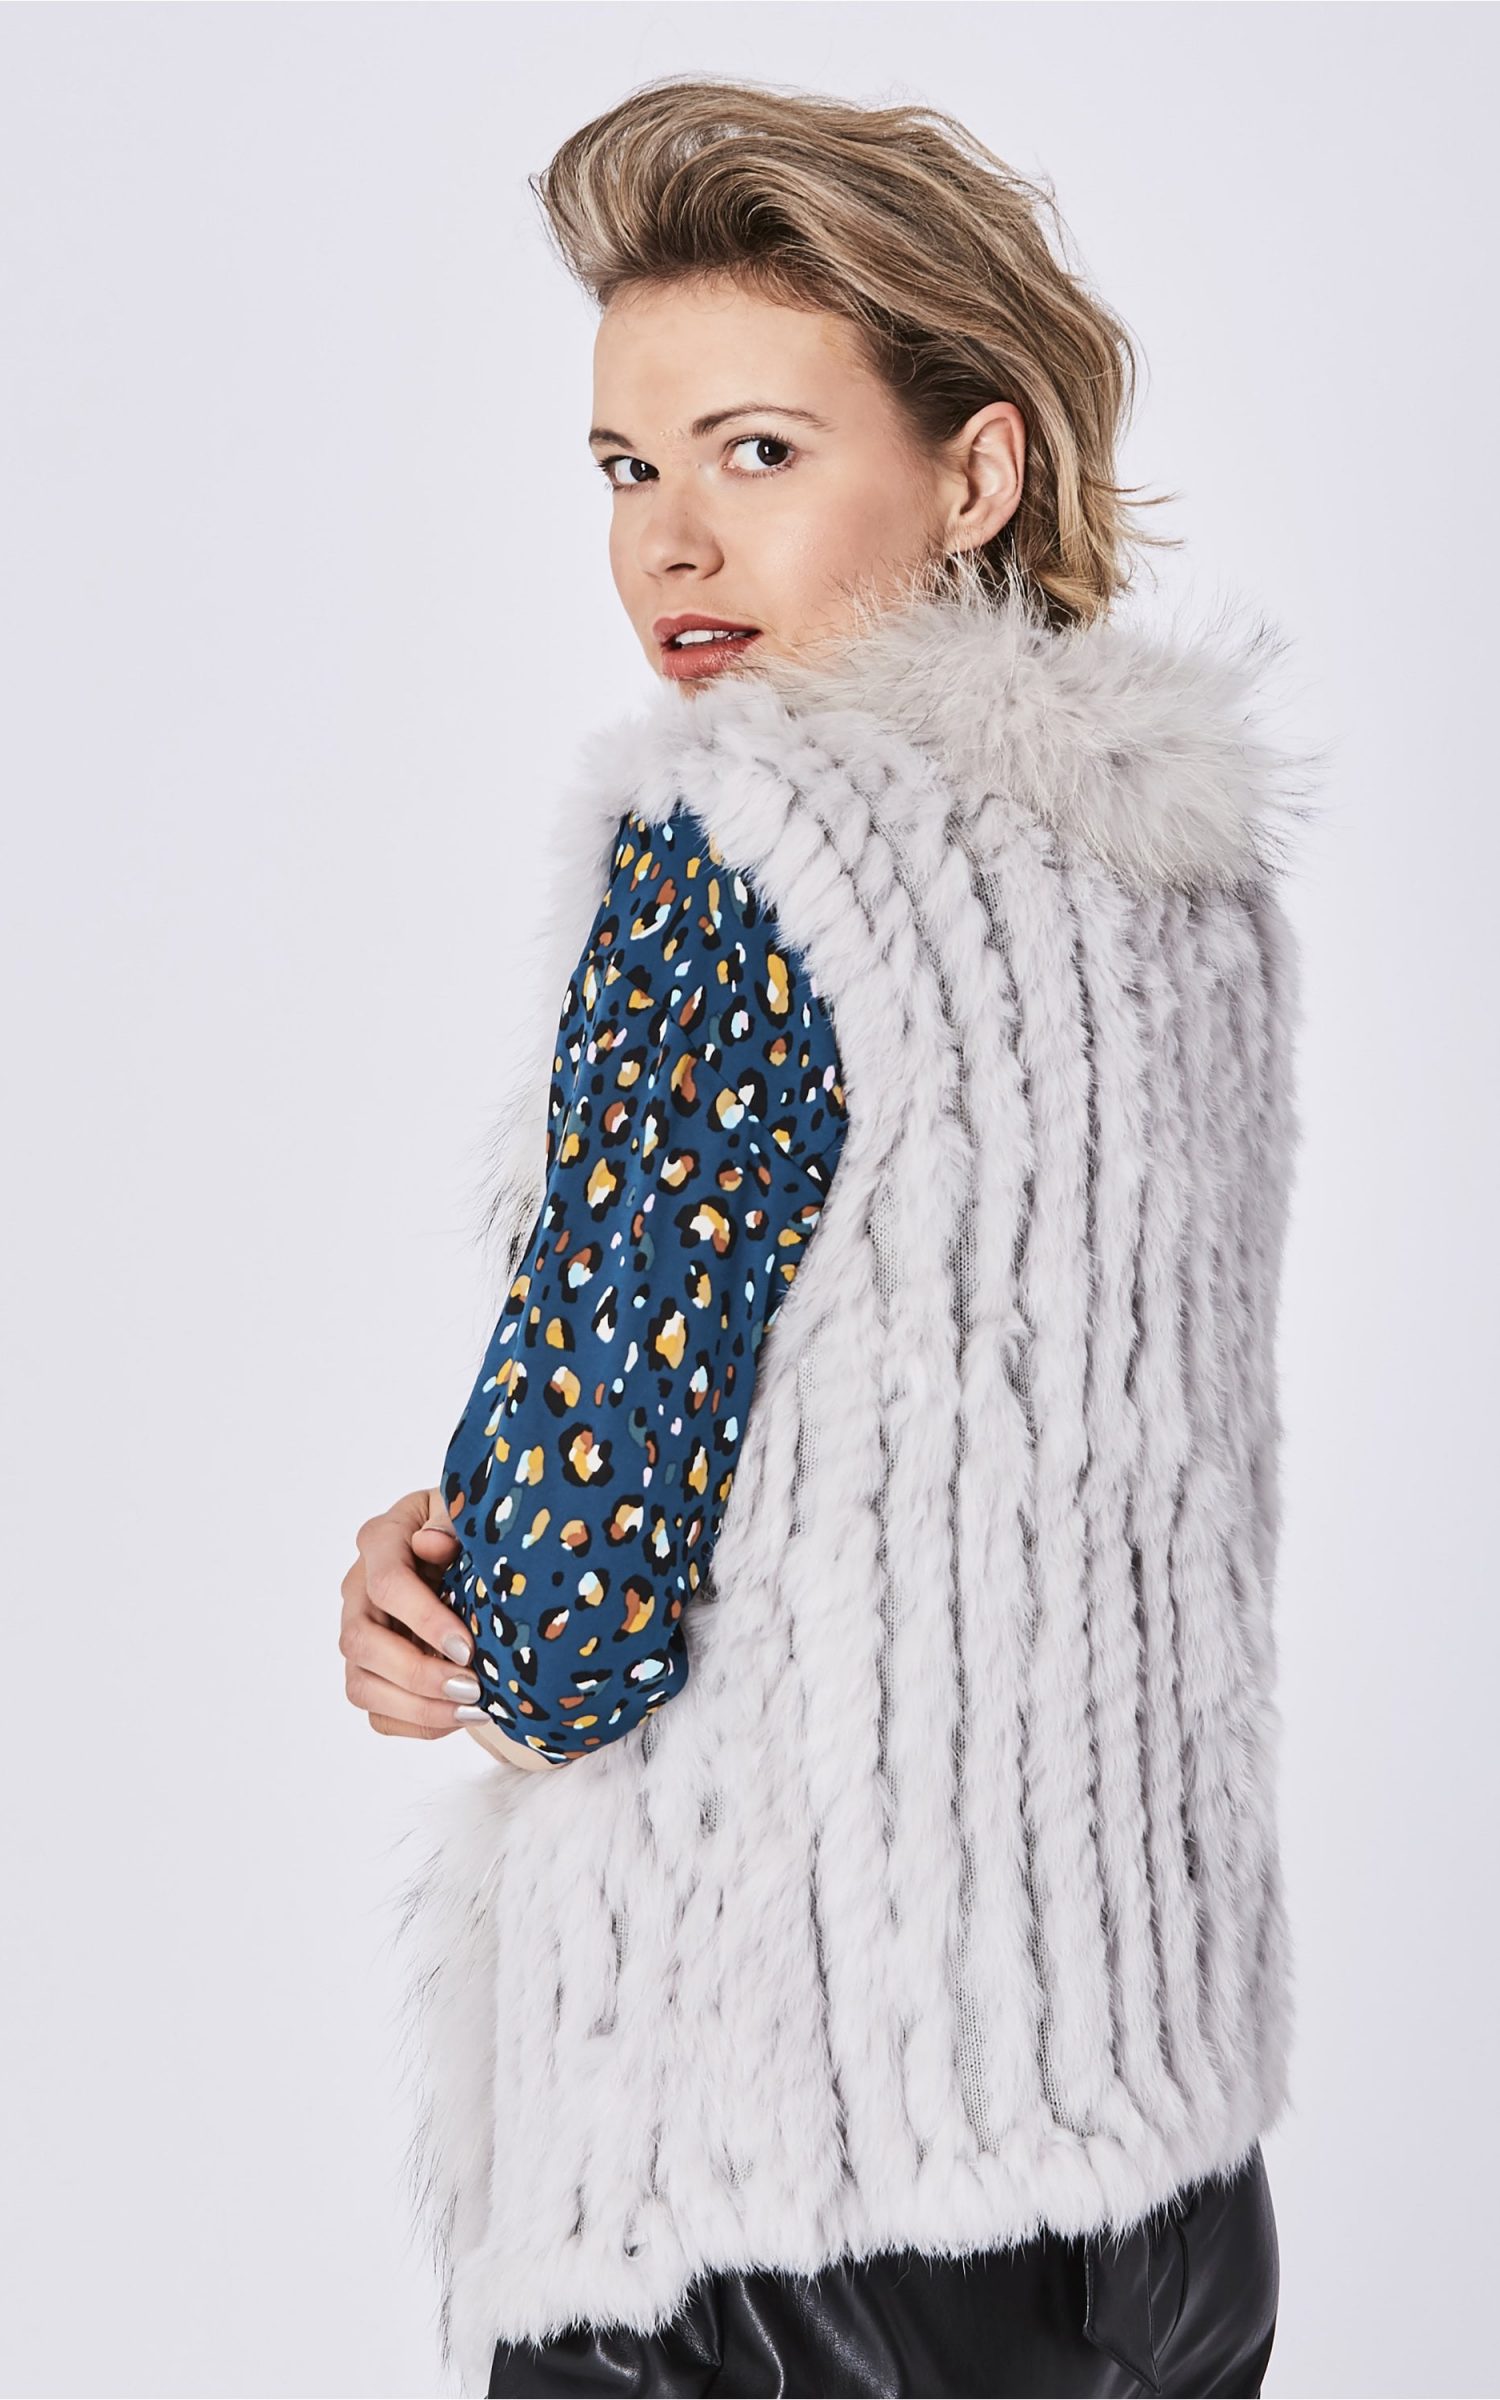 fox-and-coney-fur-gilet-with-collar-feature-p26-19281_zoom